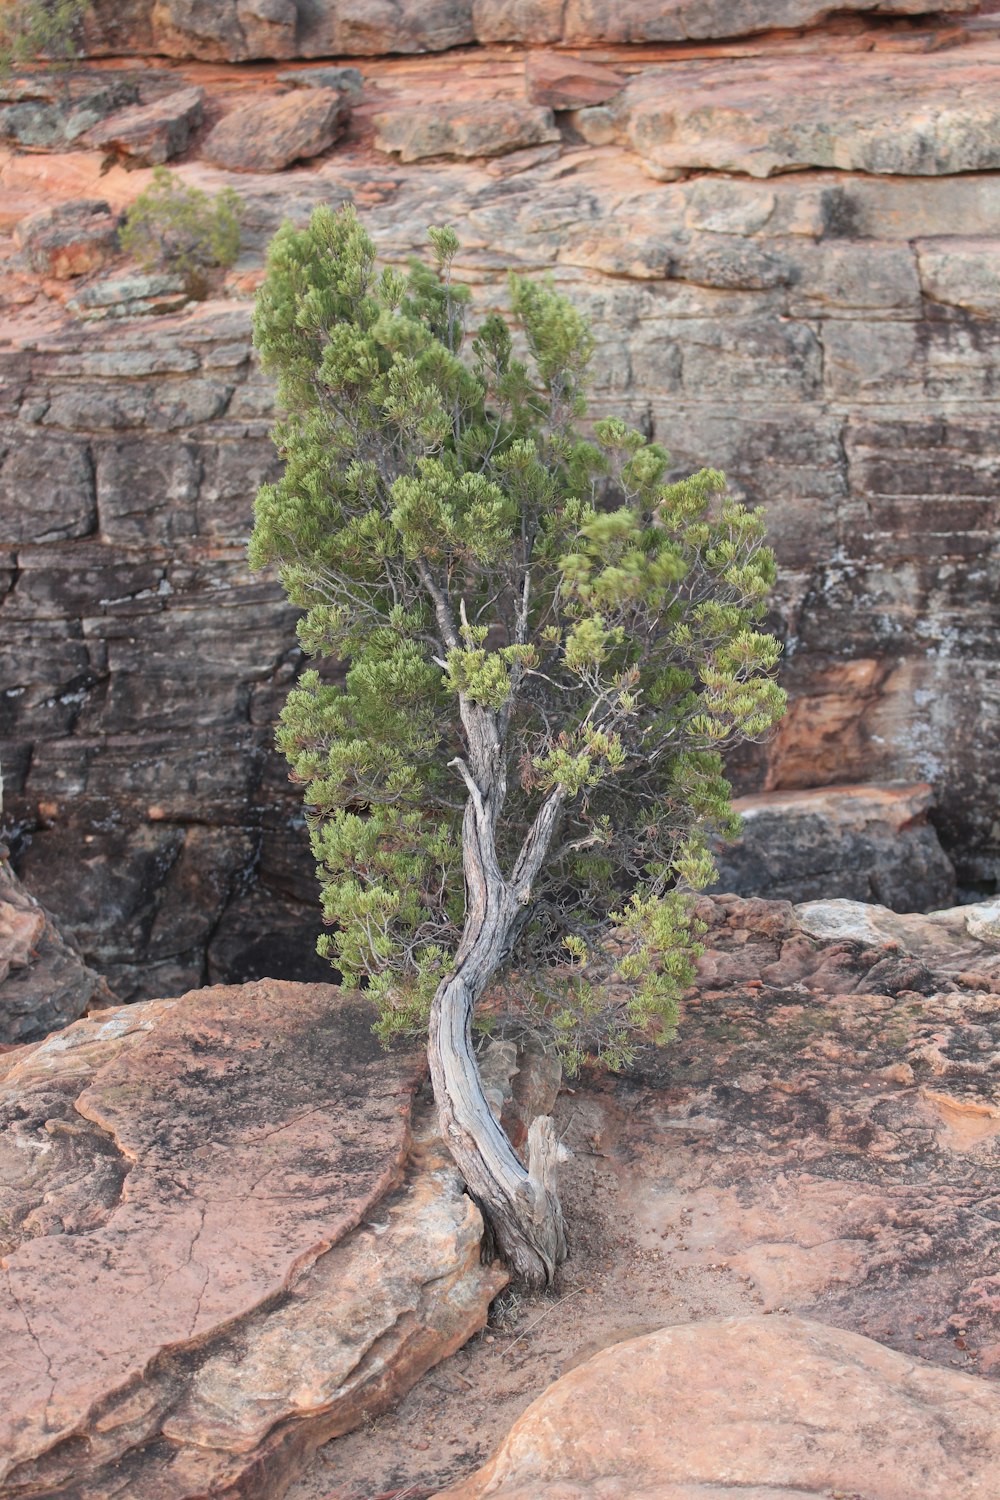 a small tree growing out of a crack in the rocks